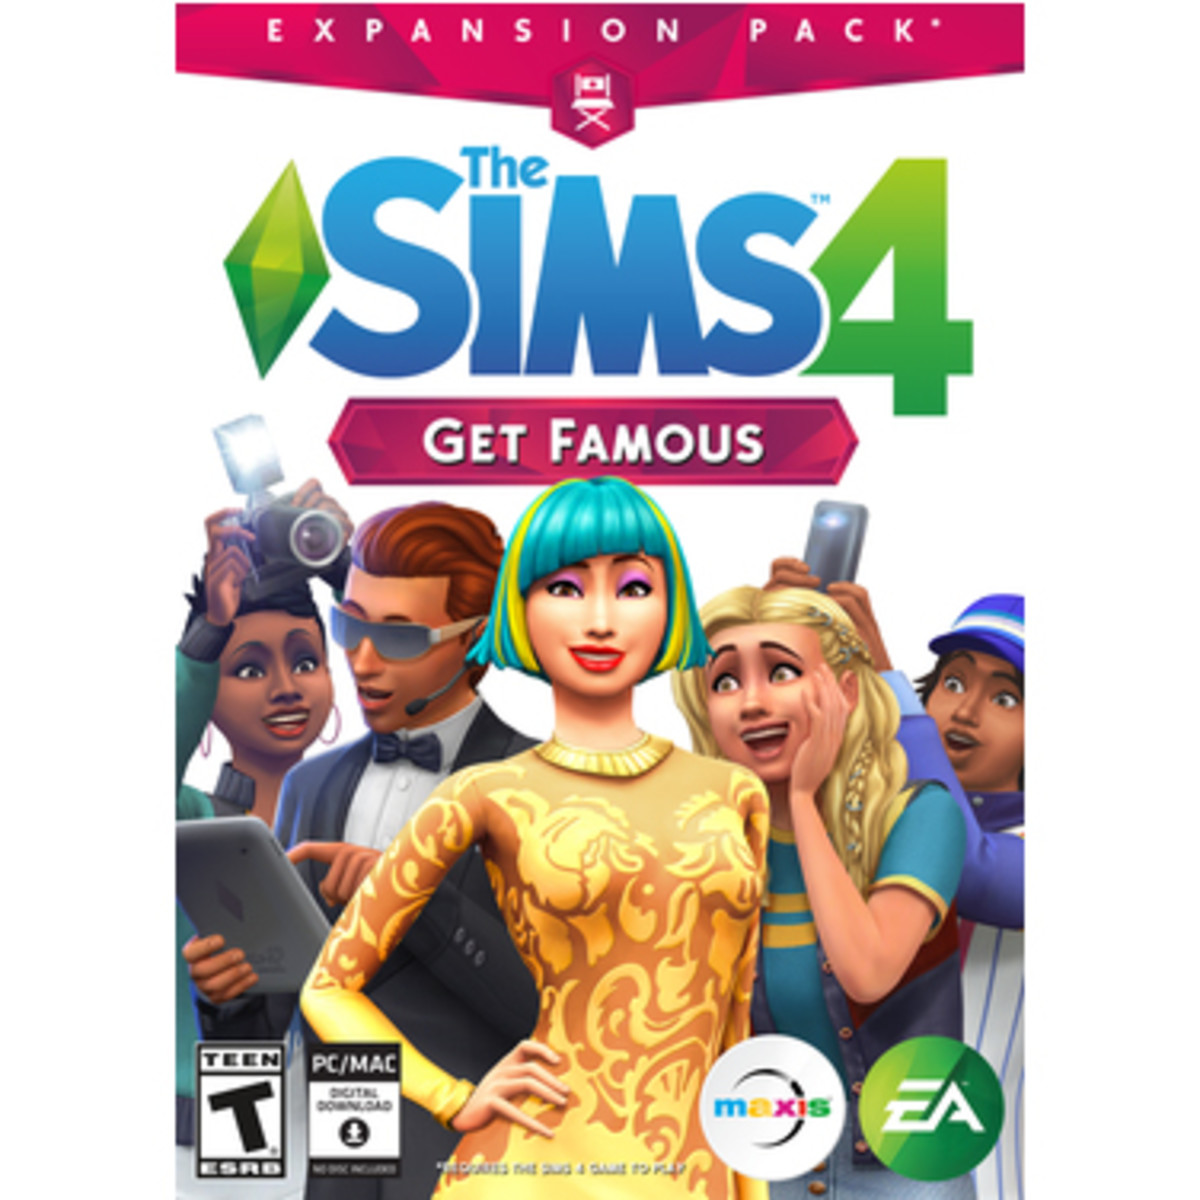 "The Sims 4: Get Famous" is one of those packs that change the way you play the game, but the good news is your Sims can opt out of fame.